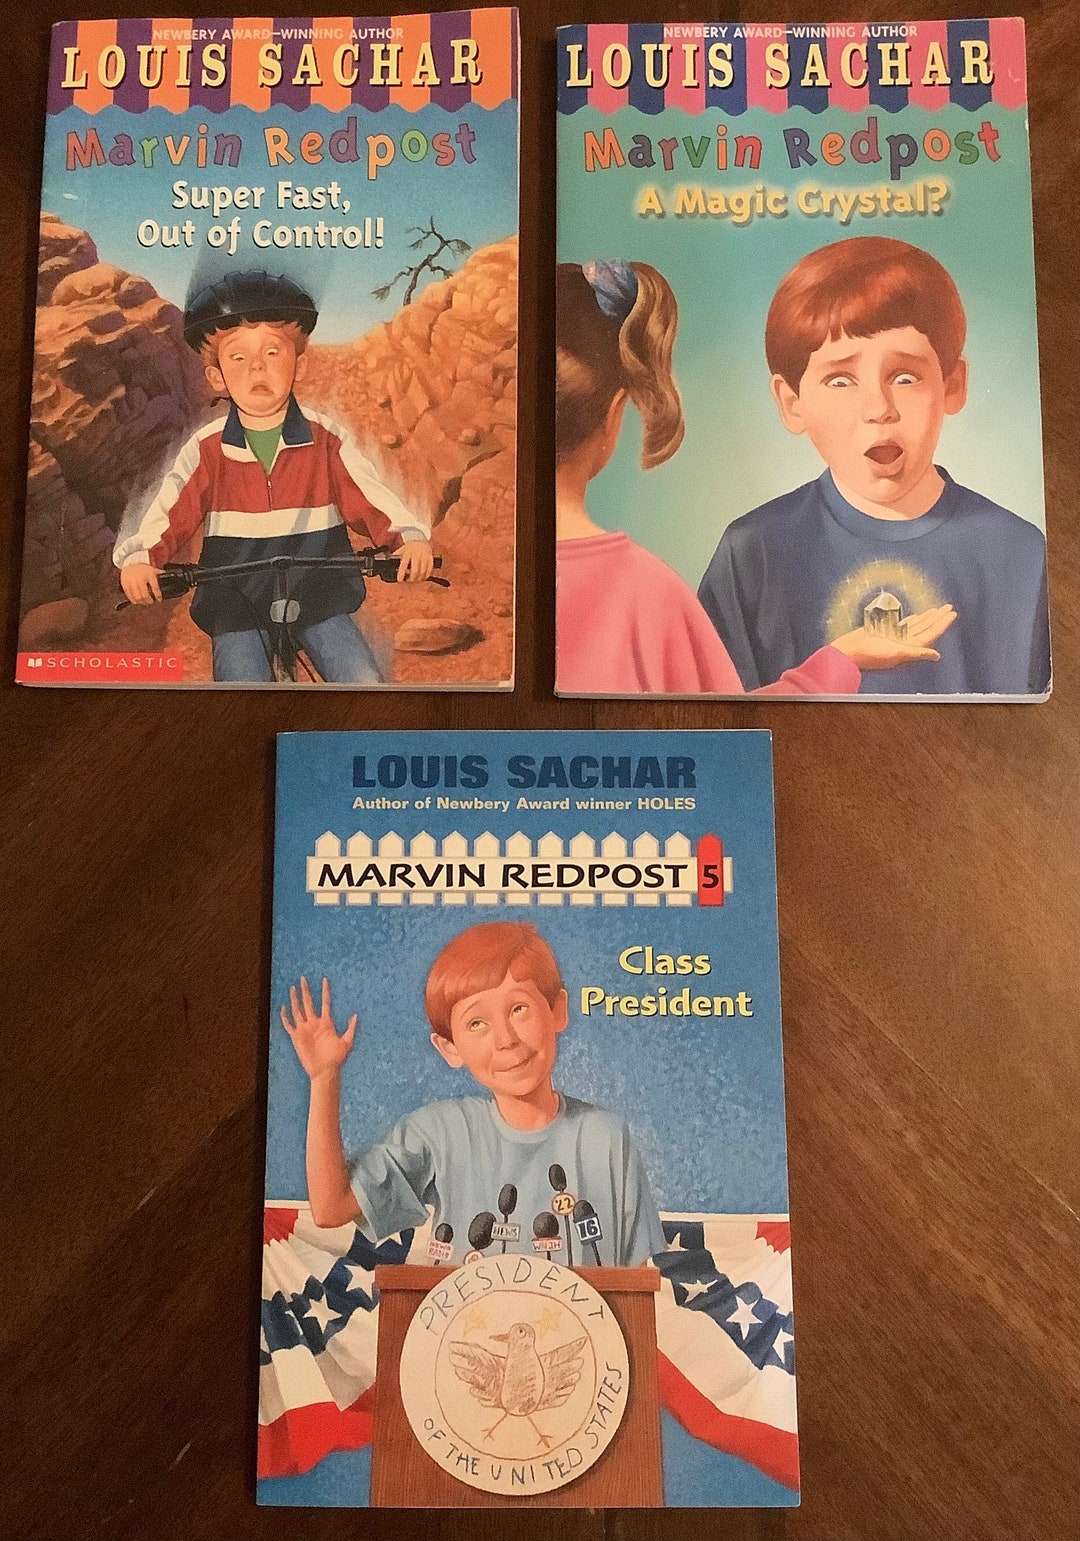 Complete Marvin Redpost Series by Louis Sachar - Paperback, 8